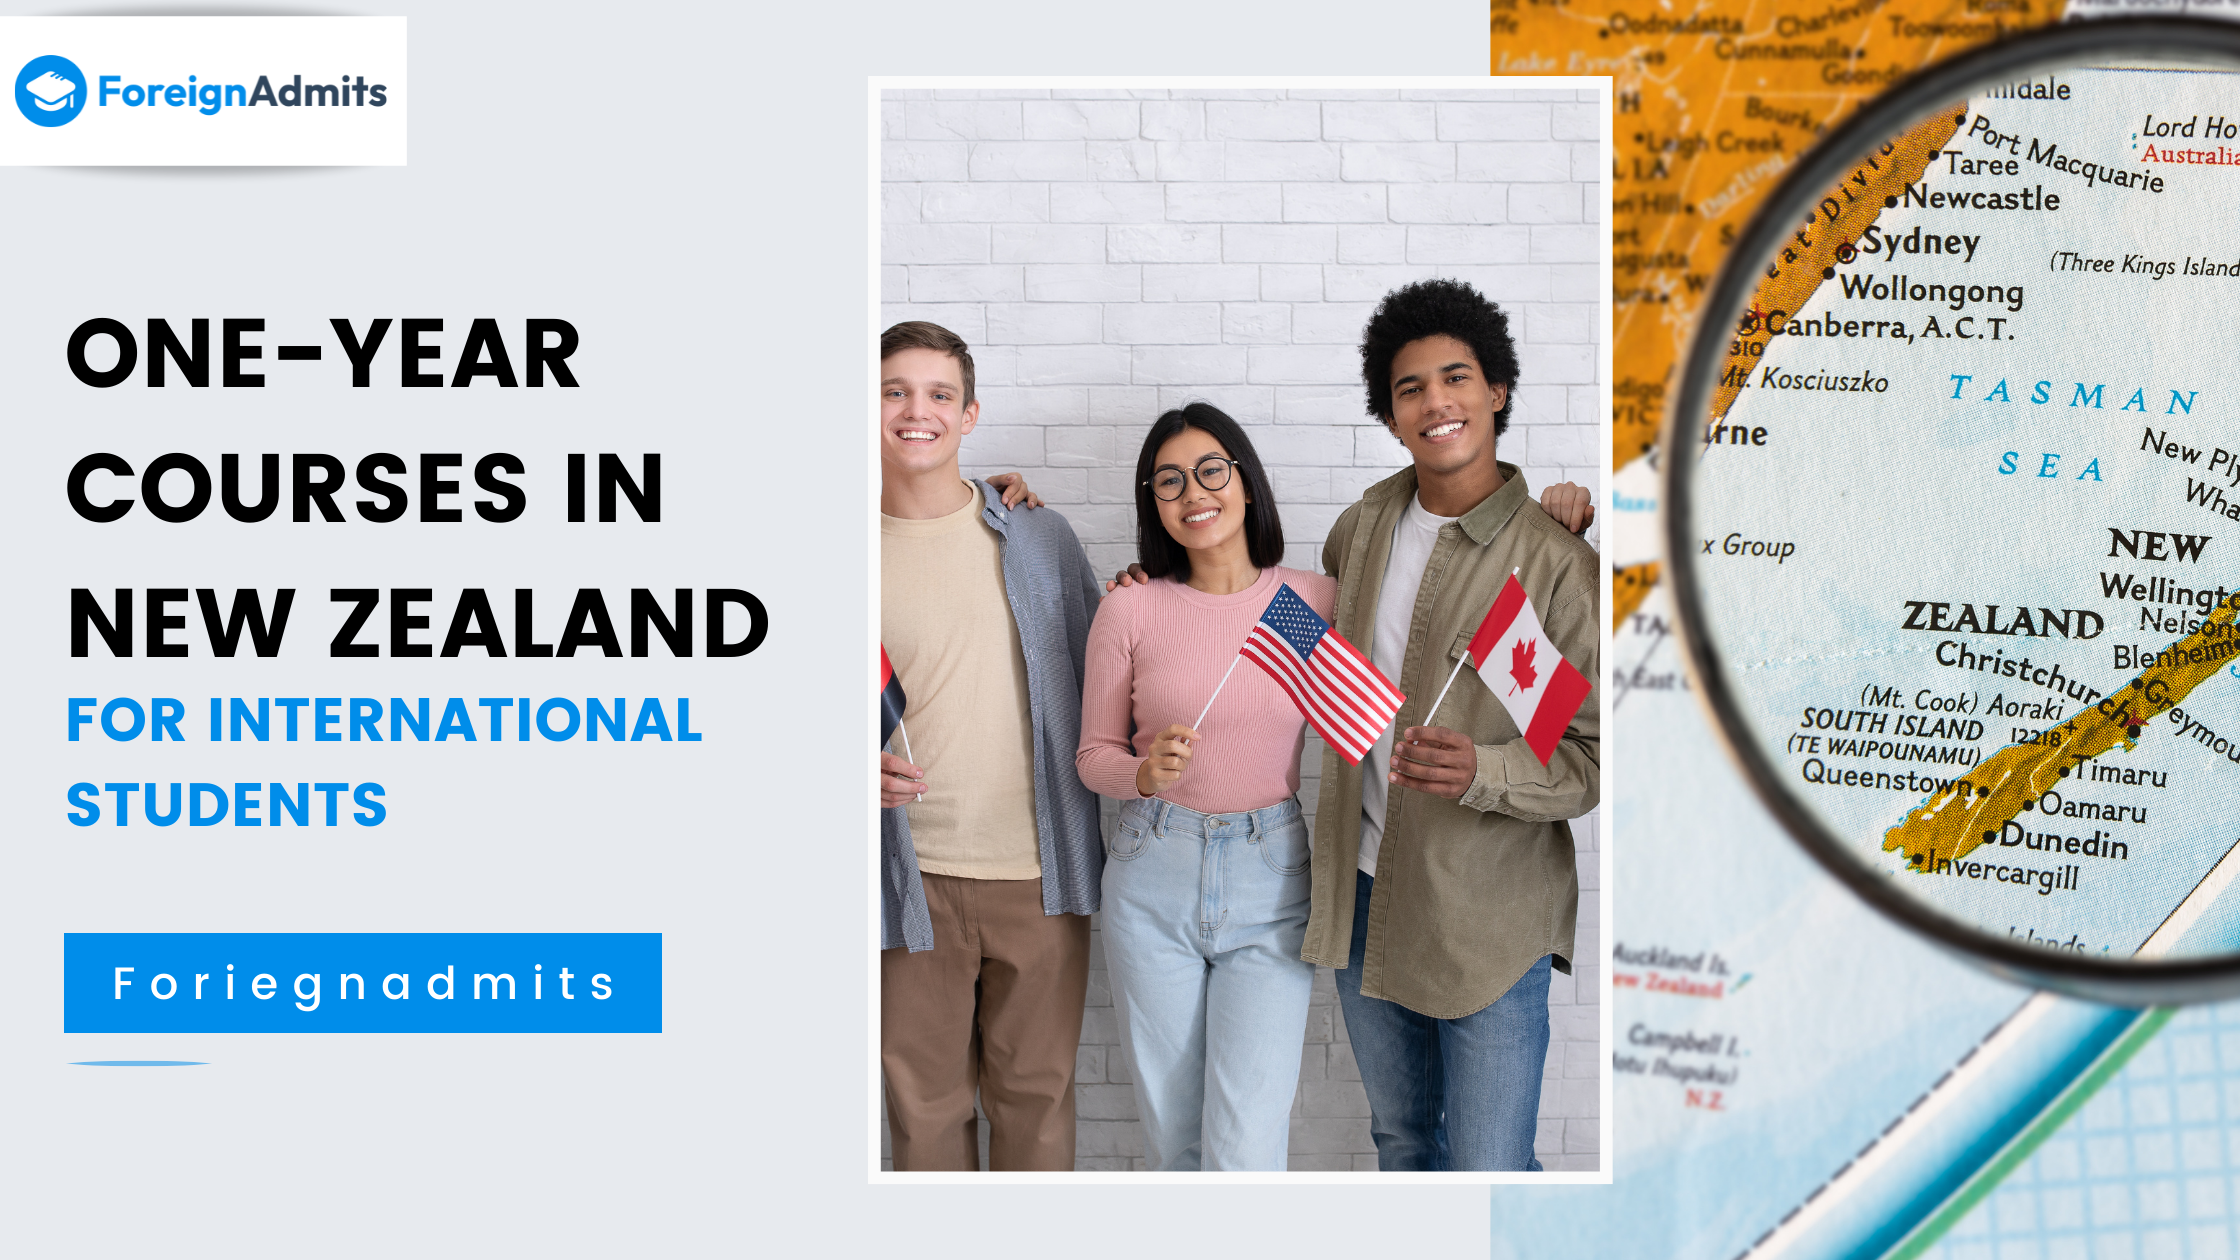 One-year Courses in New Zealand for International Students